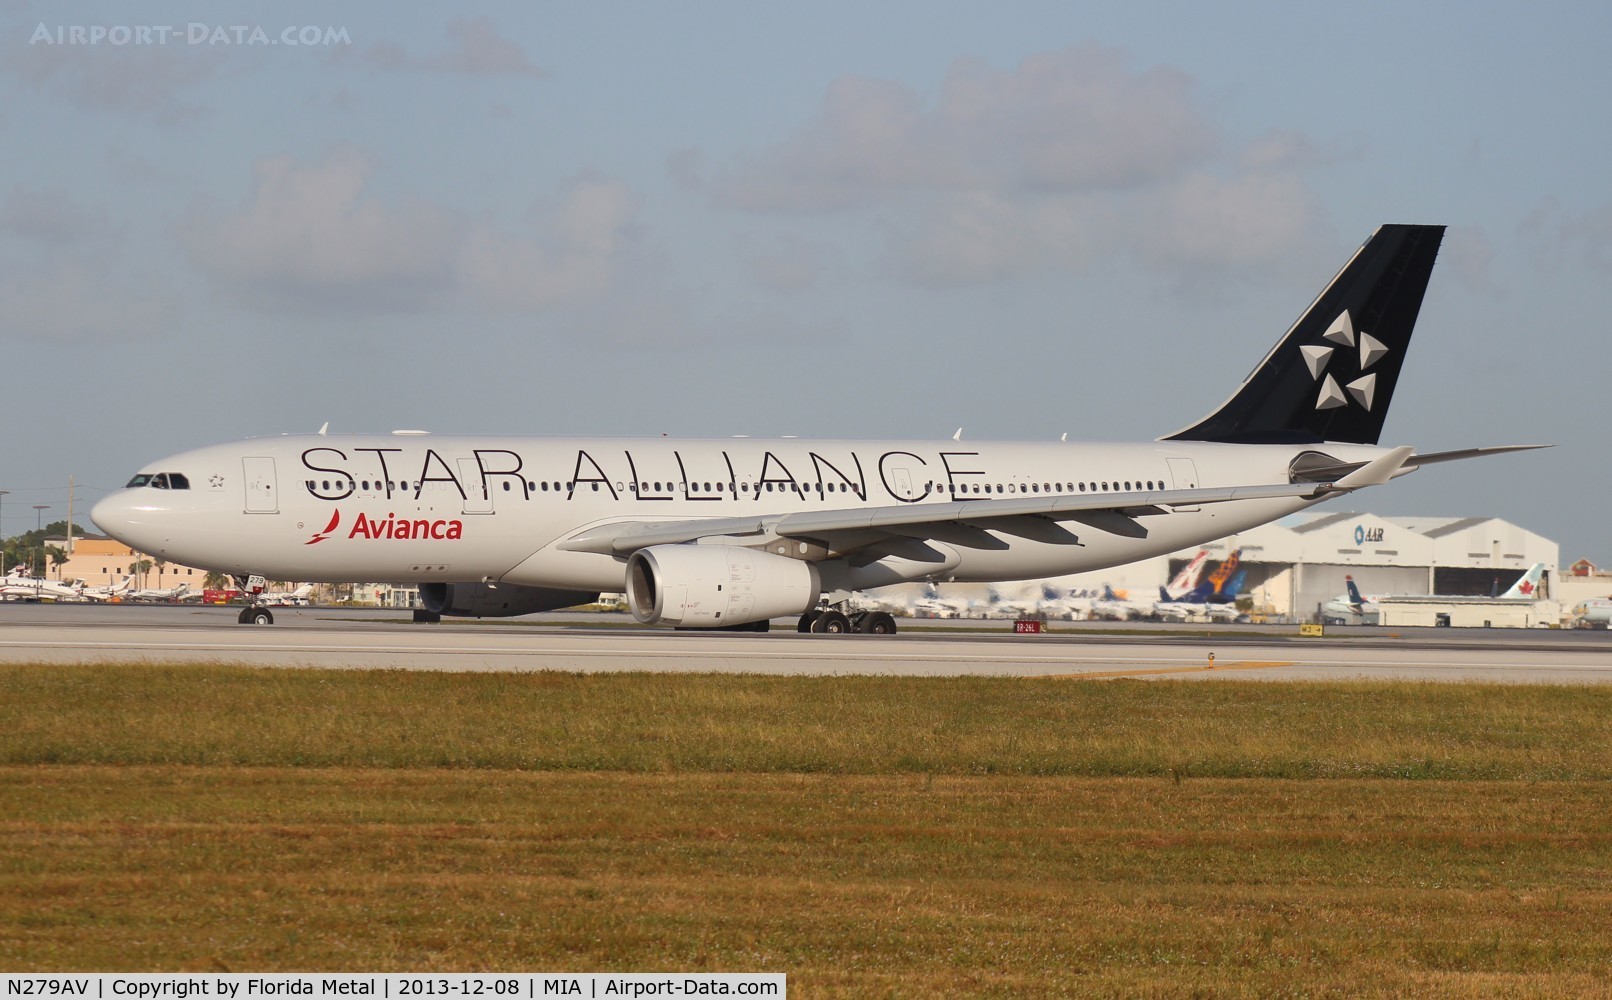 N279AV, 2011 Airbus A330-243 C/N 1279, Star Alliance A330, formerly with Taca titles now with Avianca